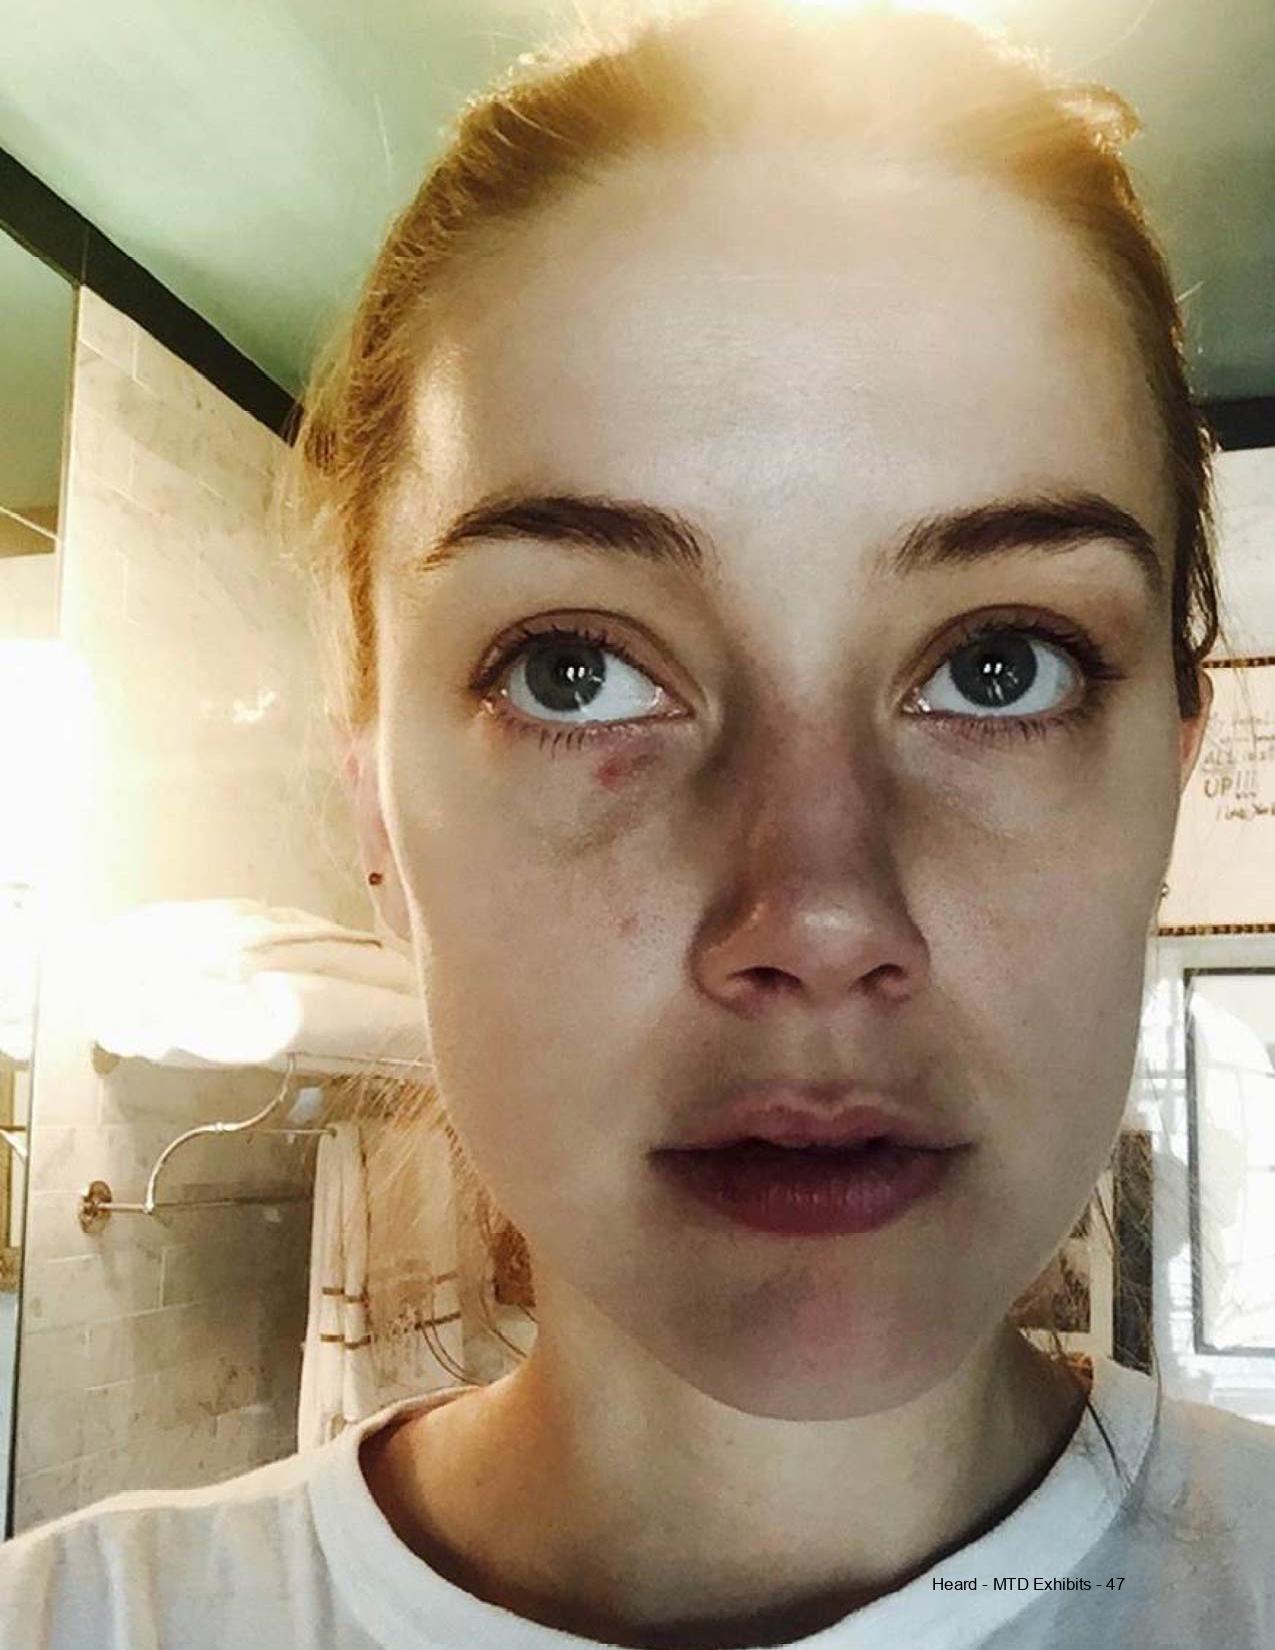 Picture used by Amber Heard to prove assualt by Johnny Depp